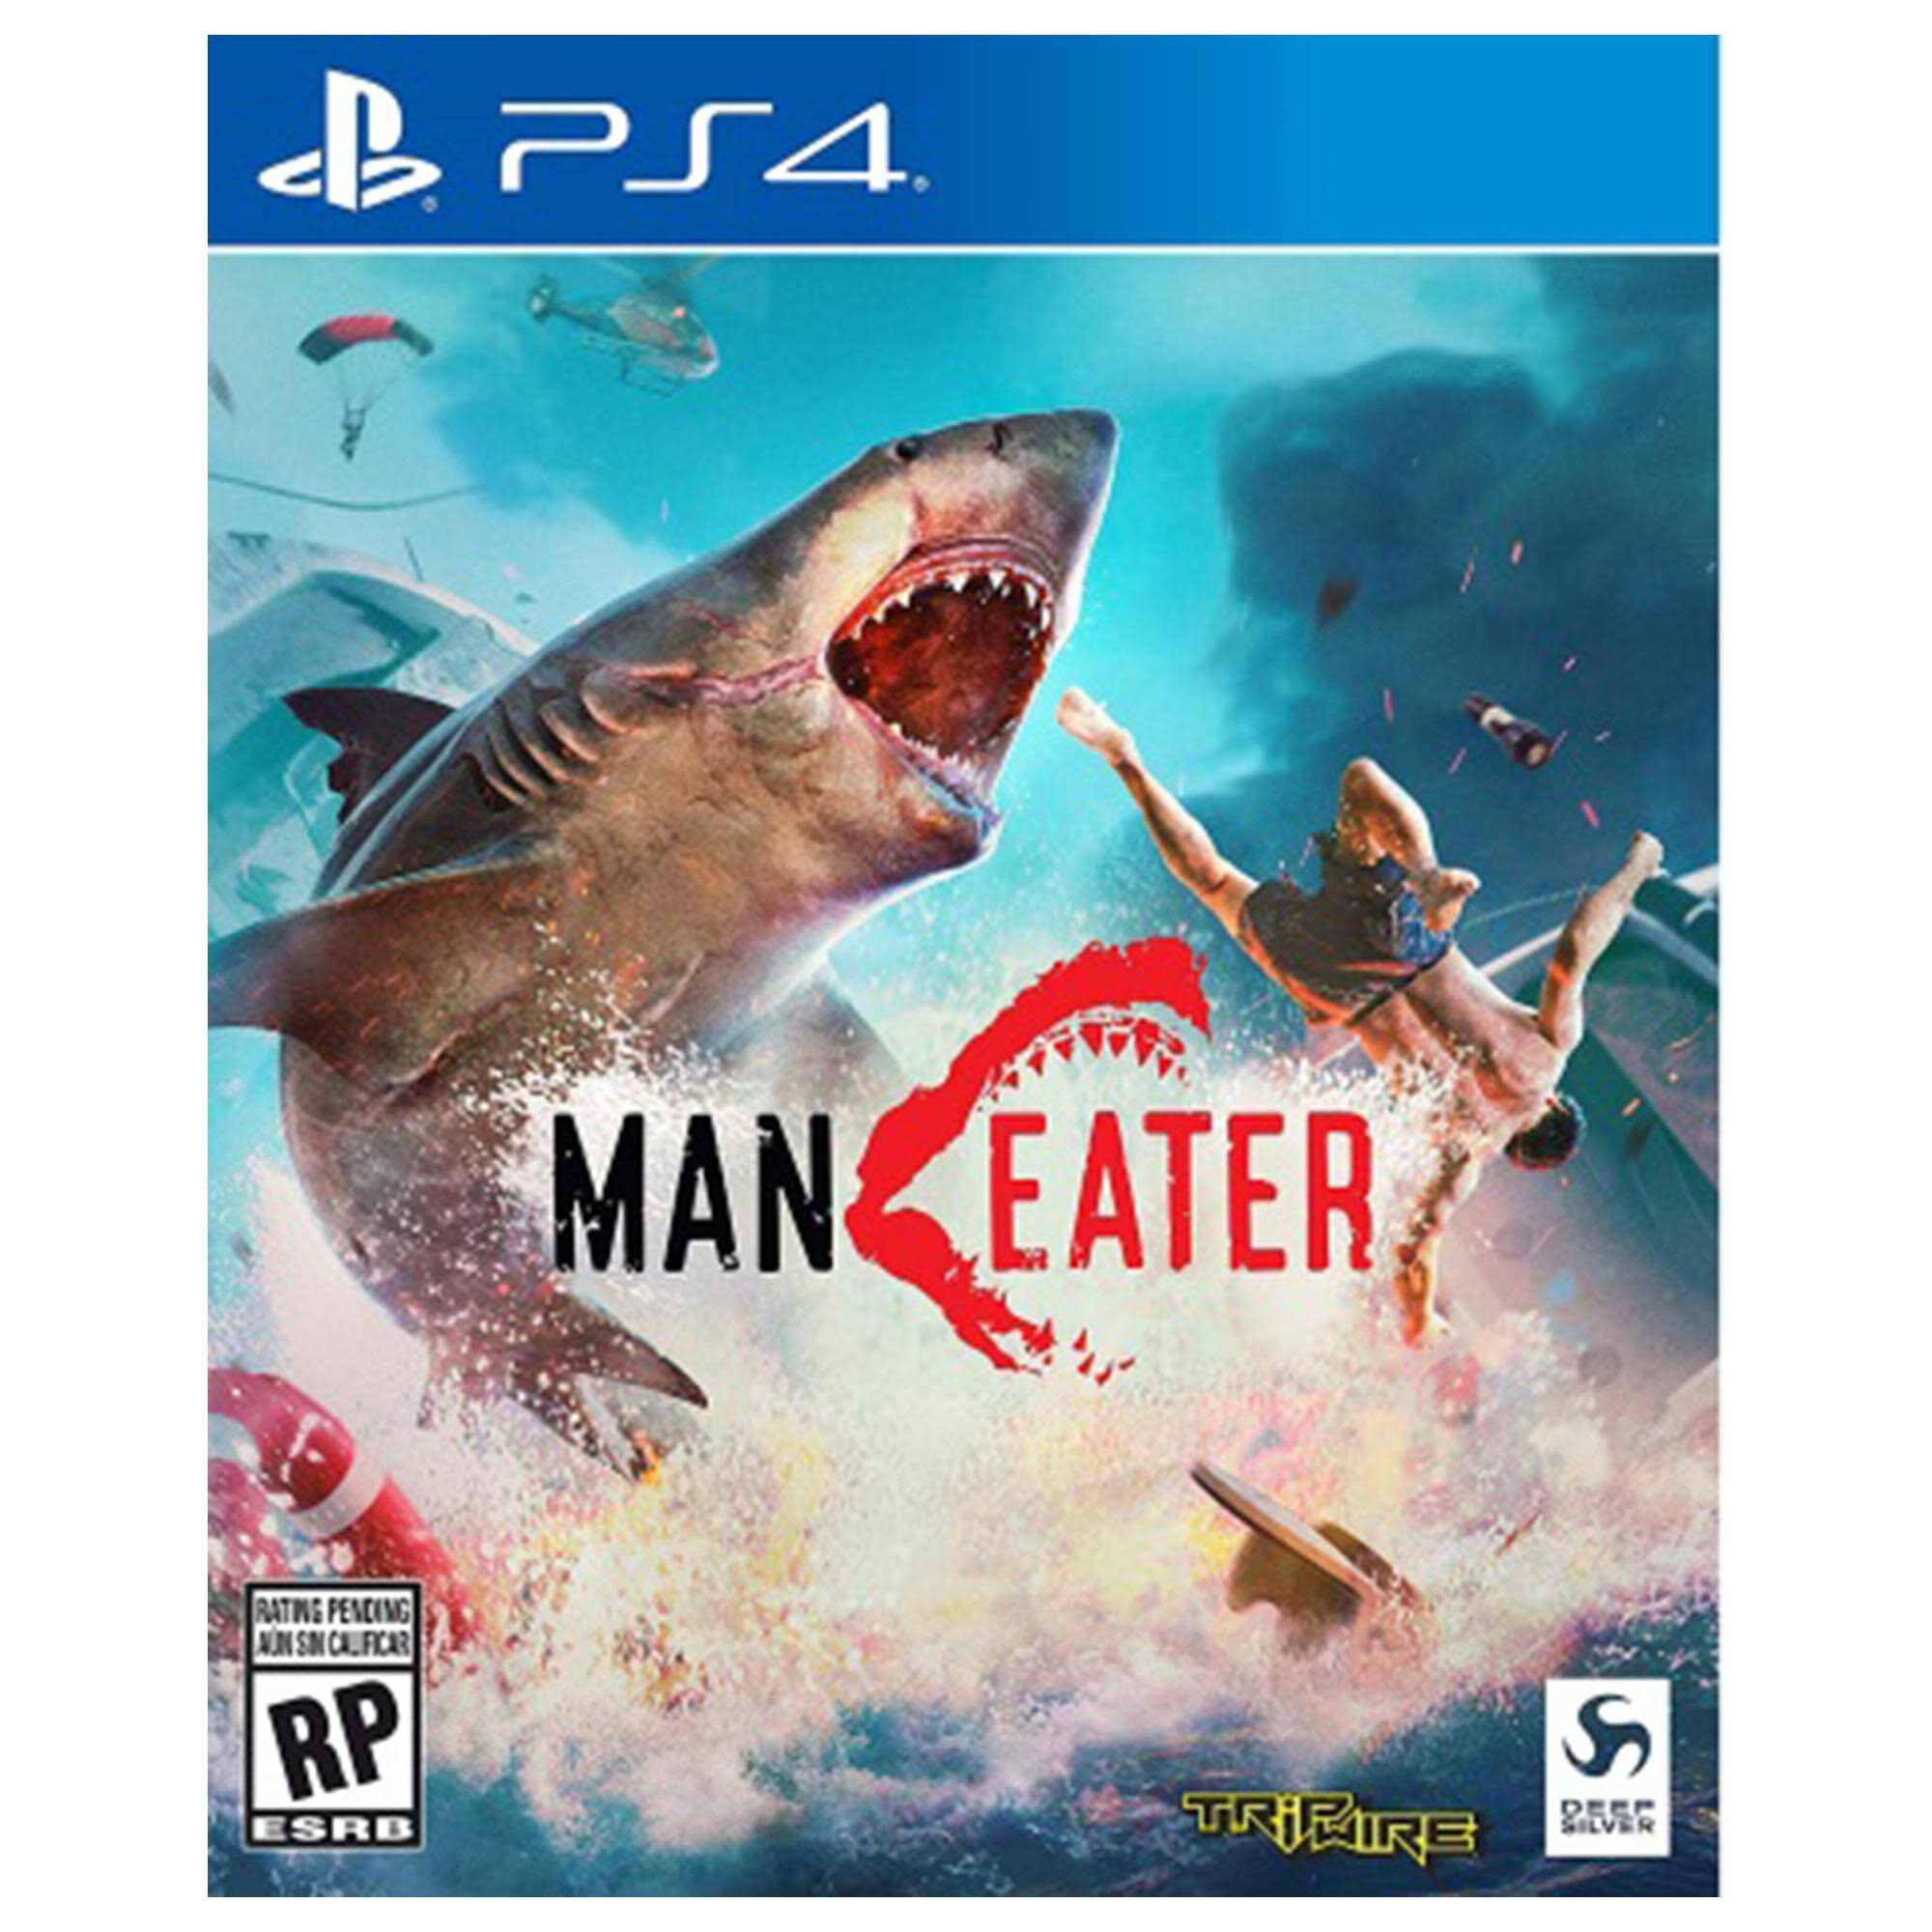 Maneater Standard Edition - PlayStation 4